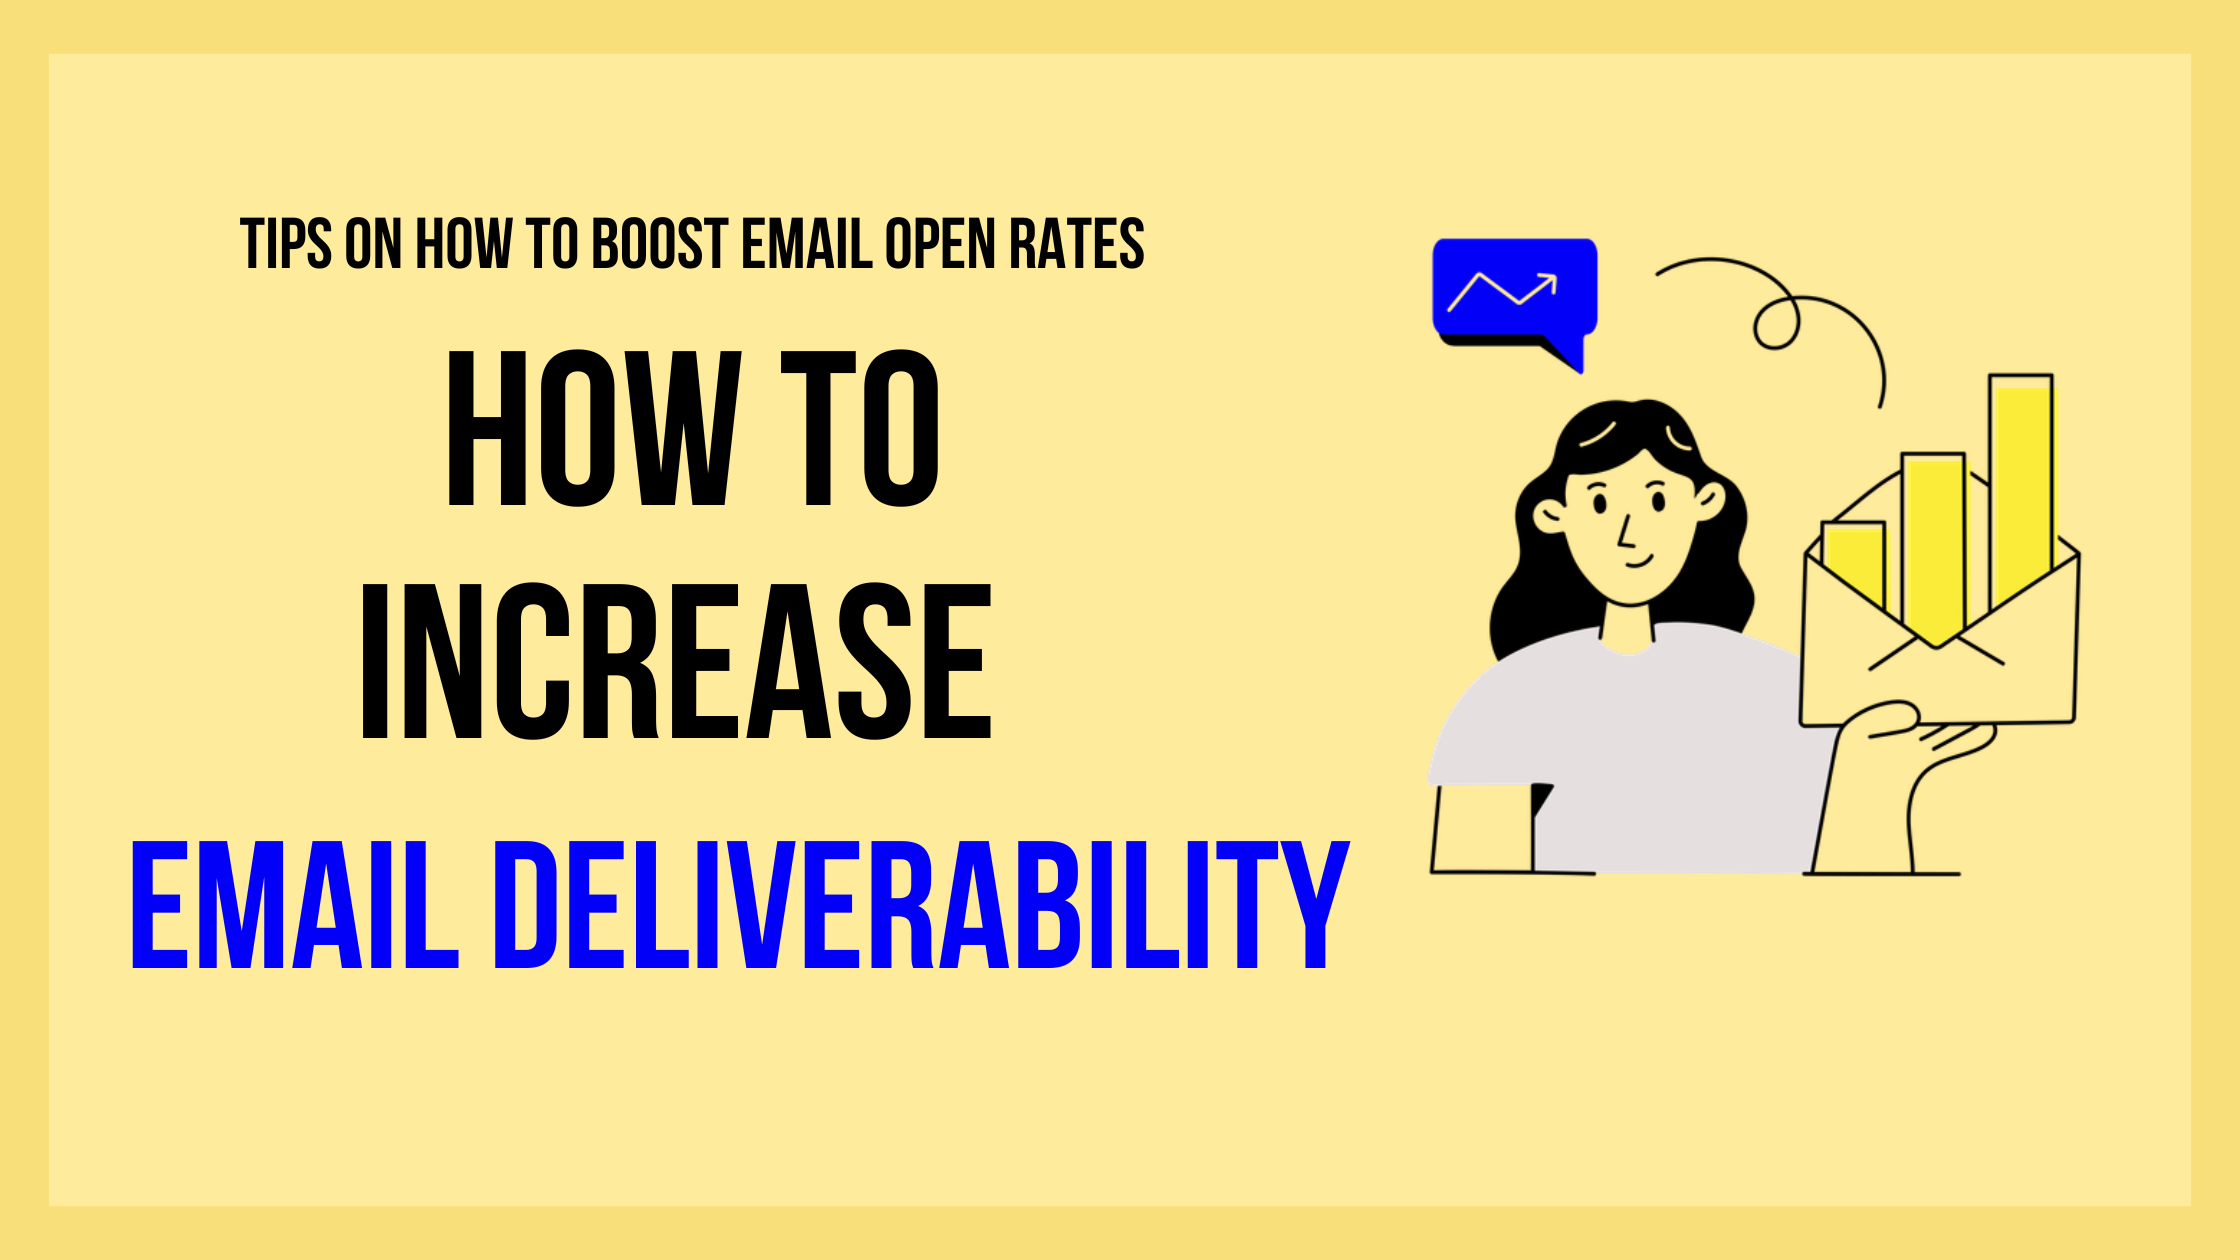 How can I improve my email deliverability?